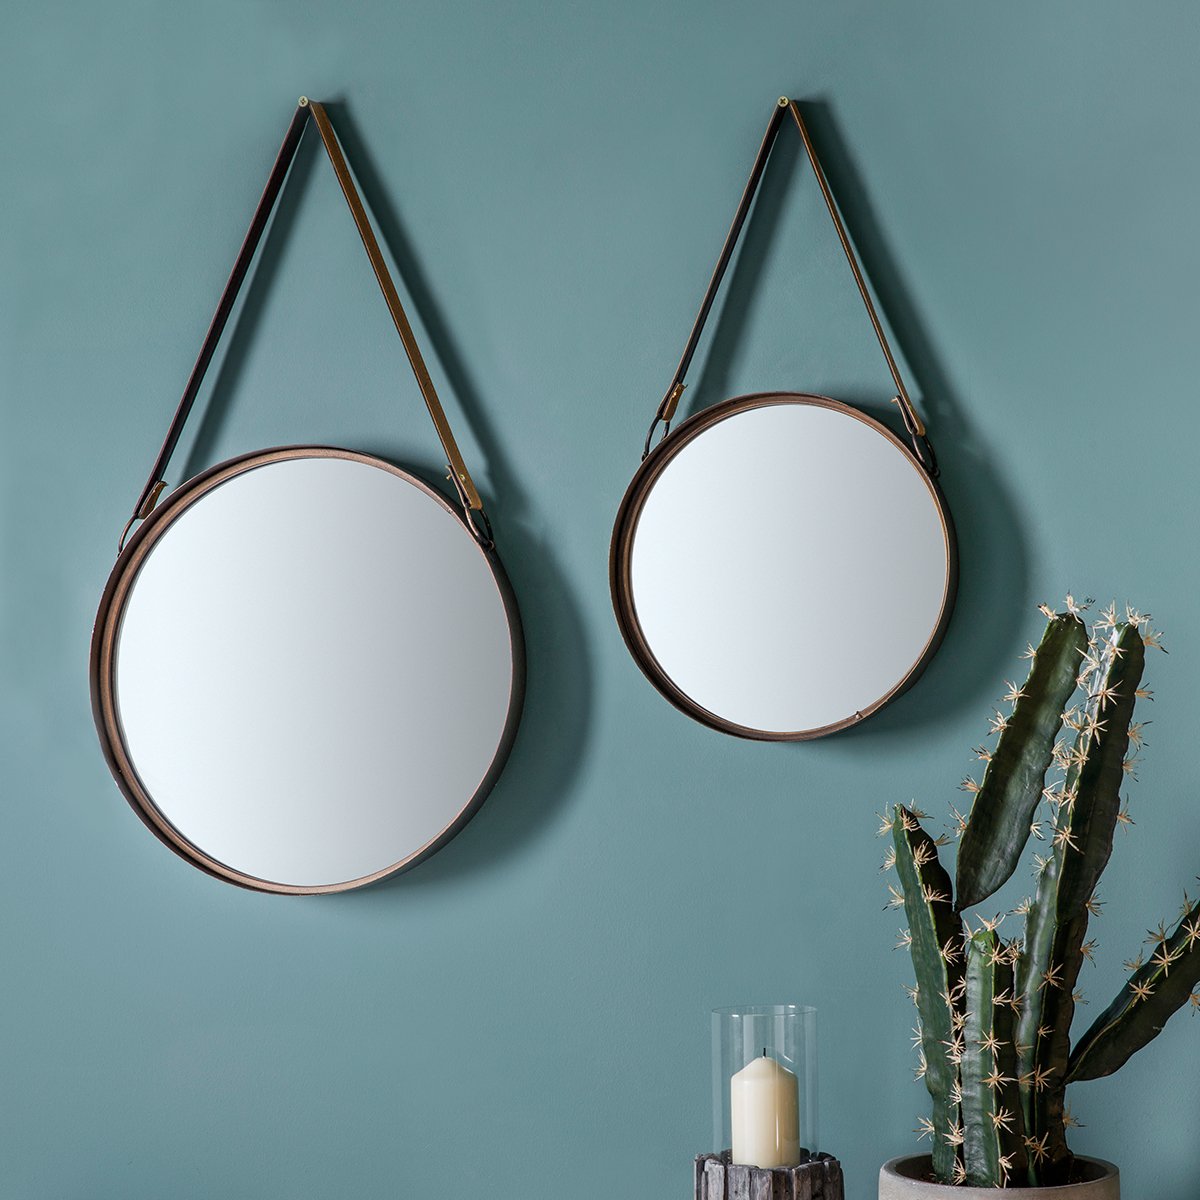 Gallery Direct Set Of 2 Marston With Leather Strap Mirrors Outlet